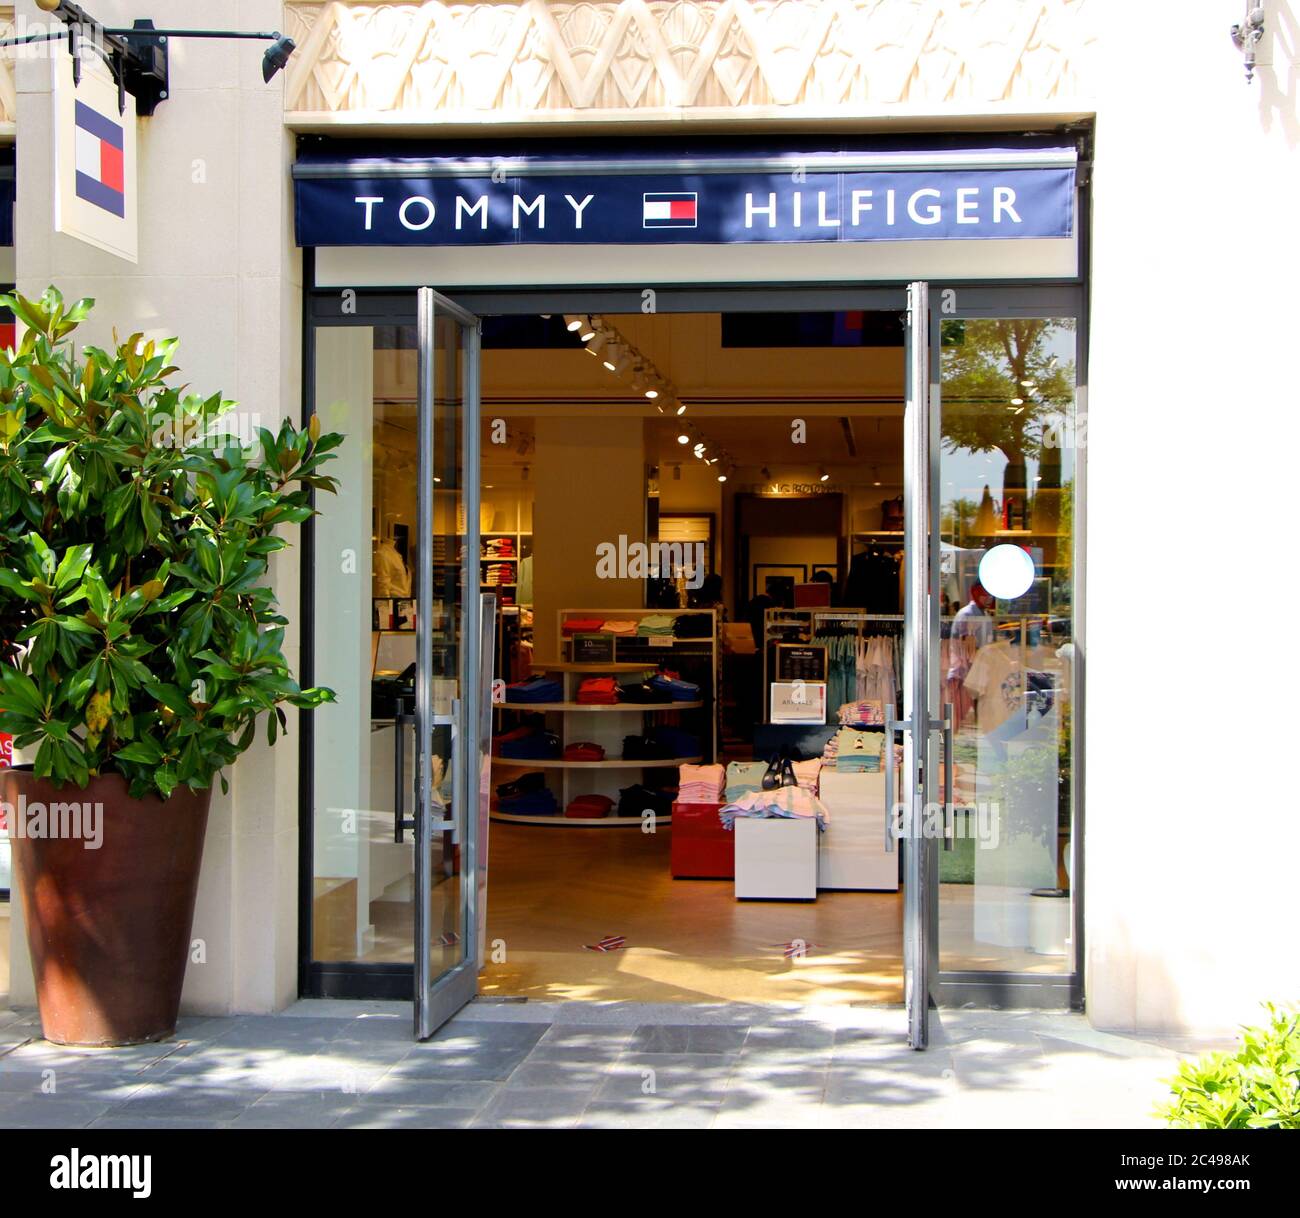 Tommy Hilfiger Shop front at Las Rozas outlet shopping Madrid